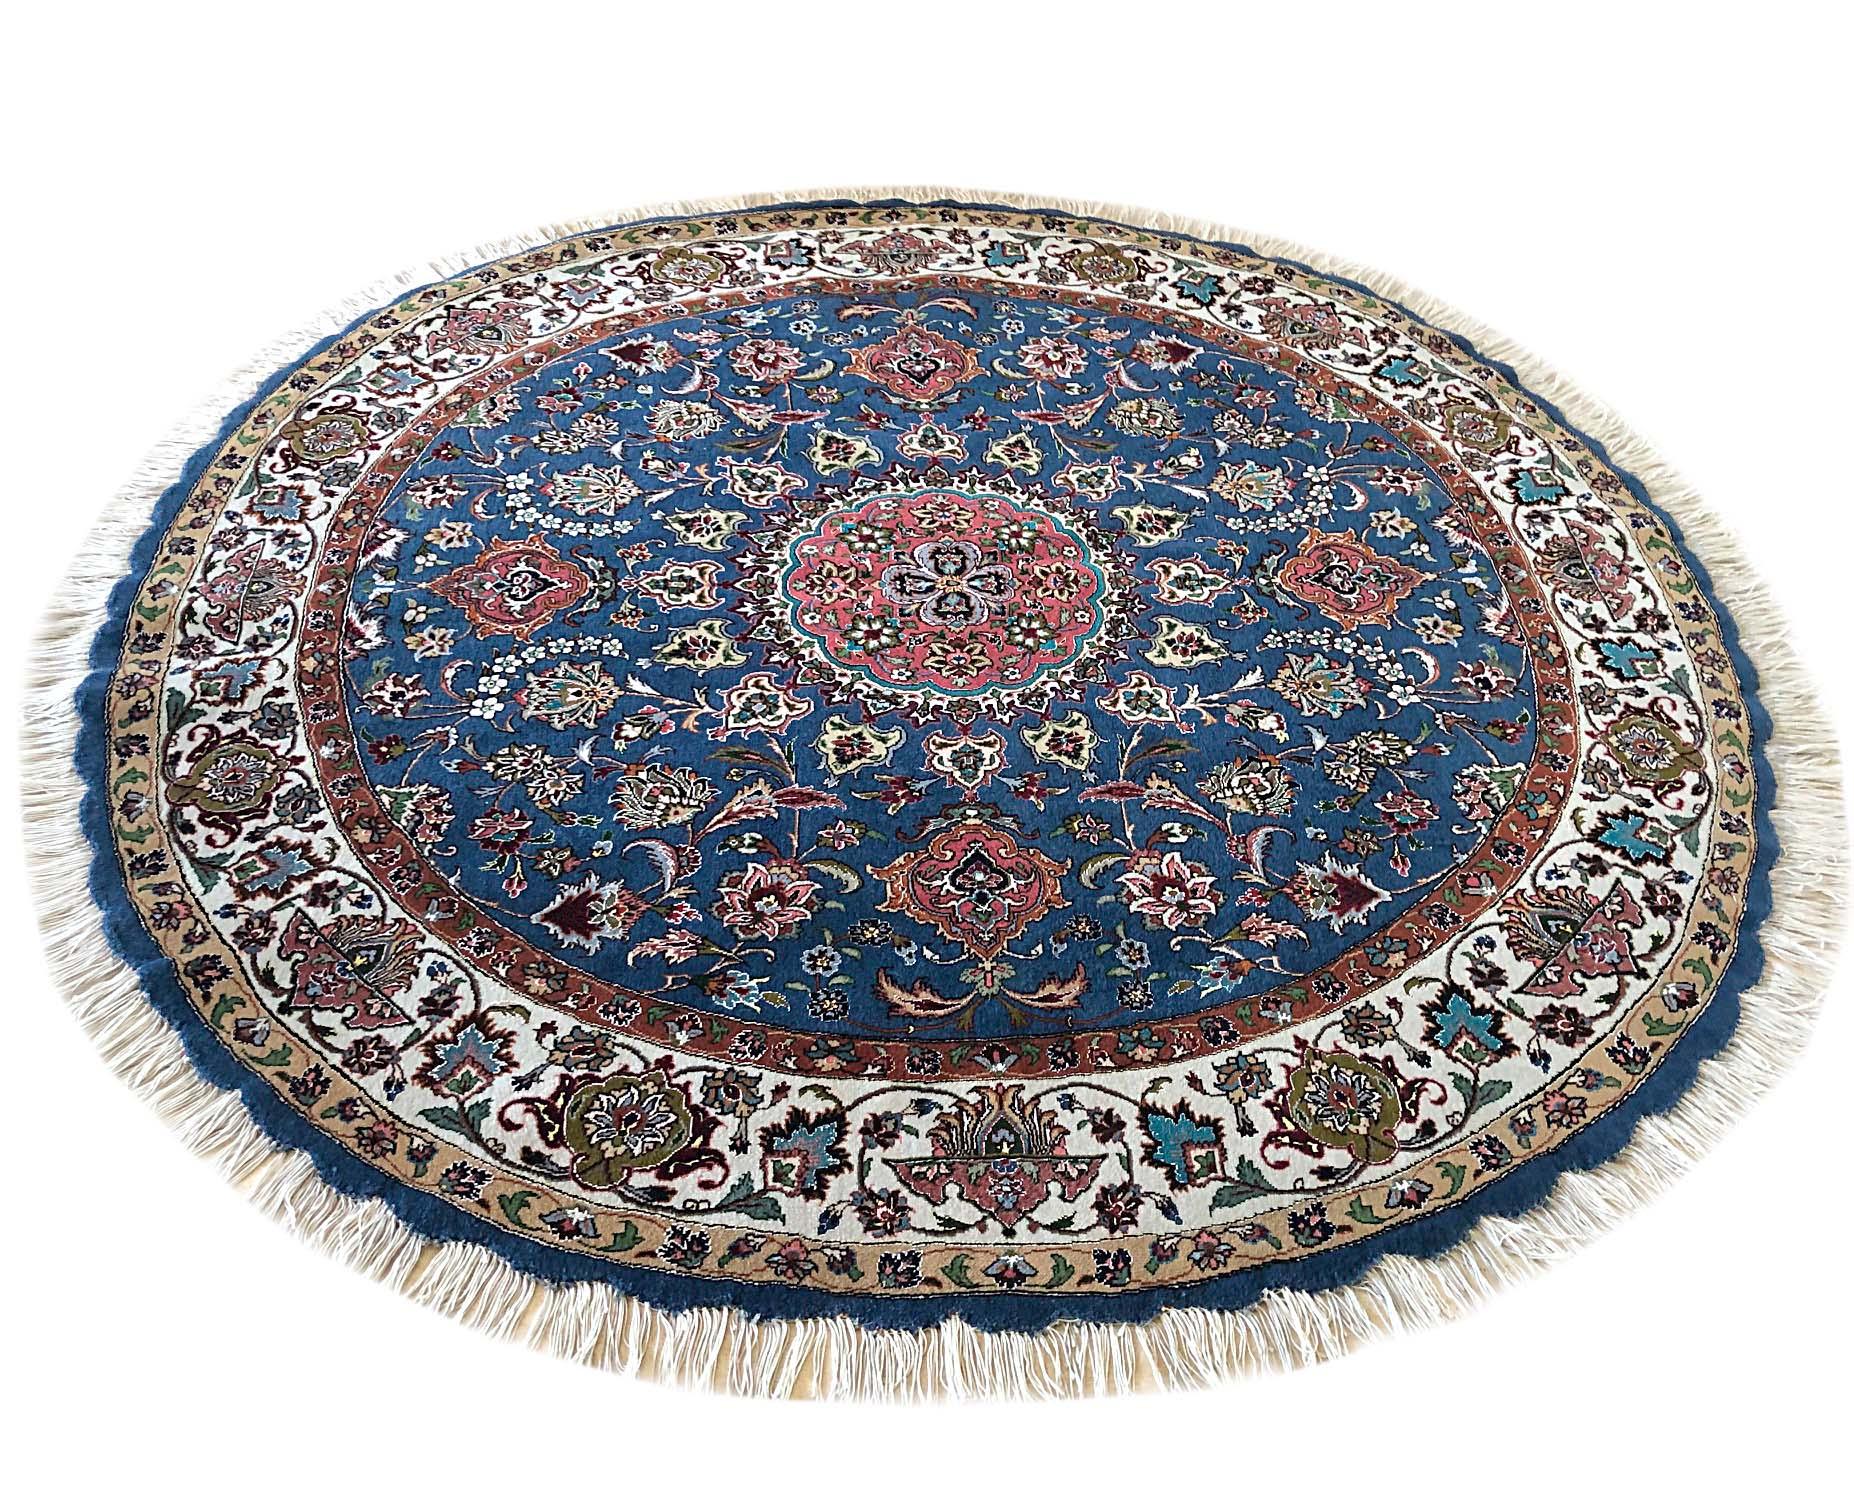 This authentic Persian handmade round rug has wool and silk pile with cotton foundation. This beautiful rug is from Tabriz and the design is medallion, floral. The base color is blue and the border is cream. The size is 5 feet diameter. This is a